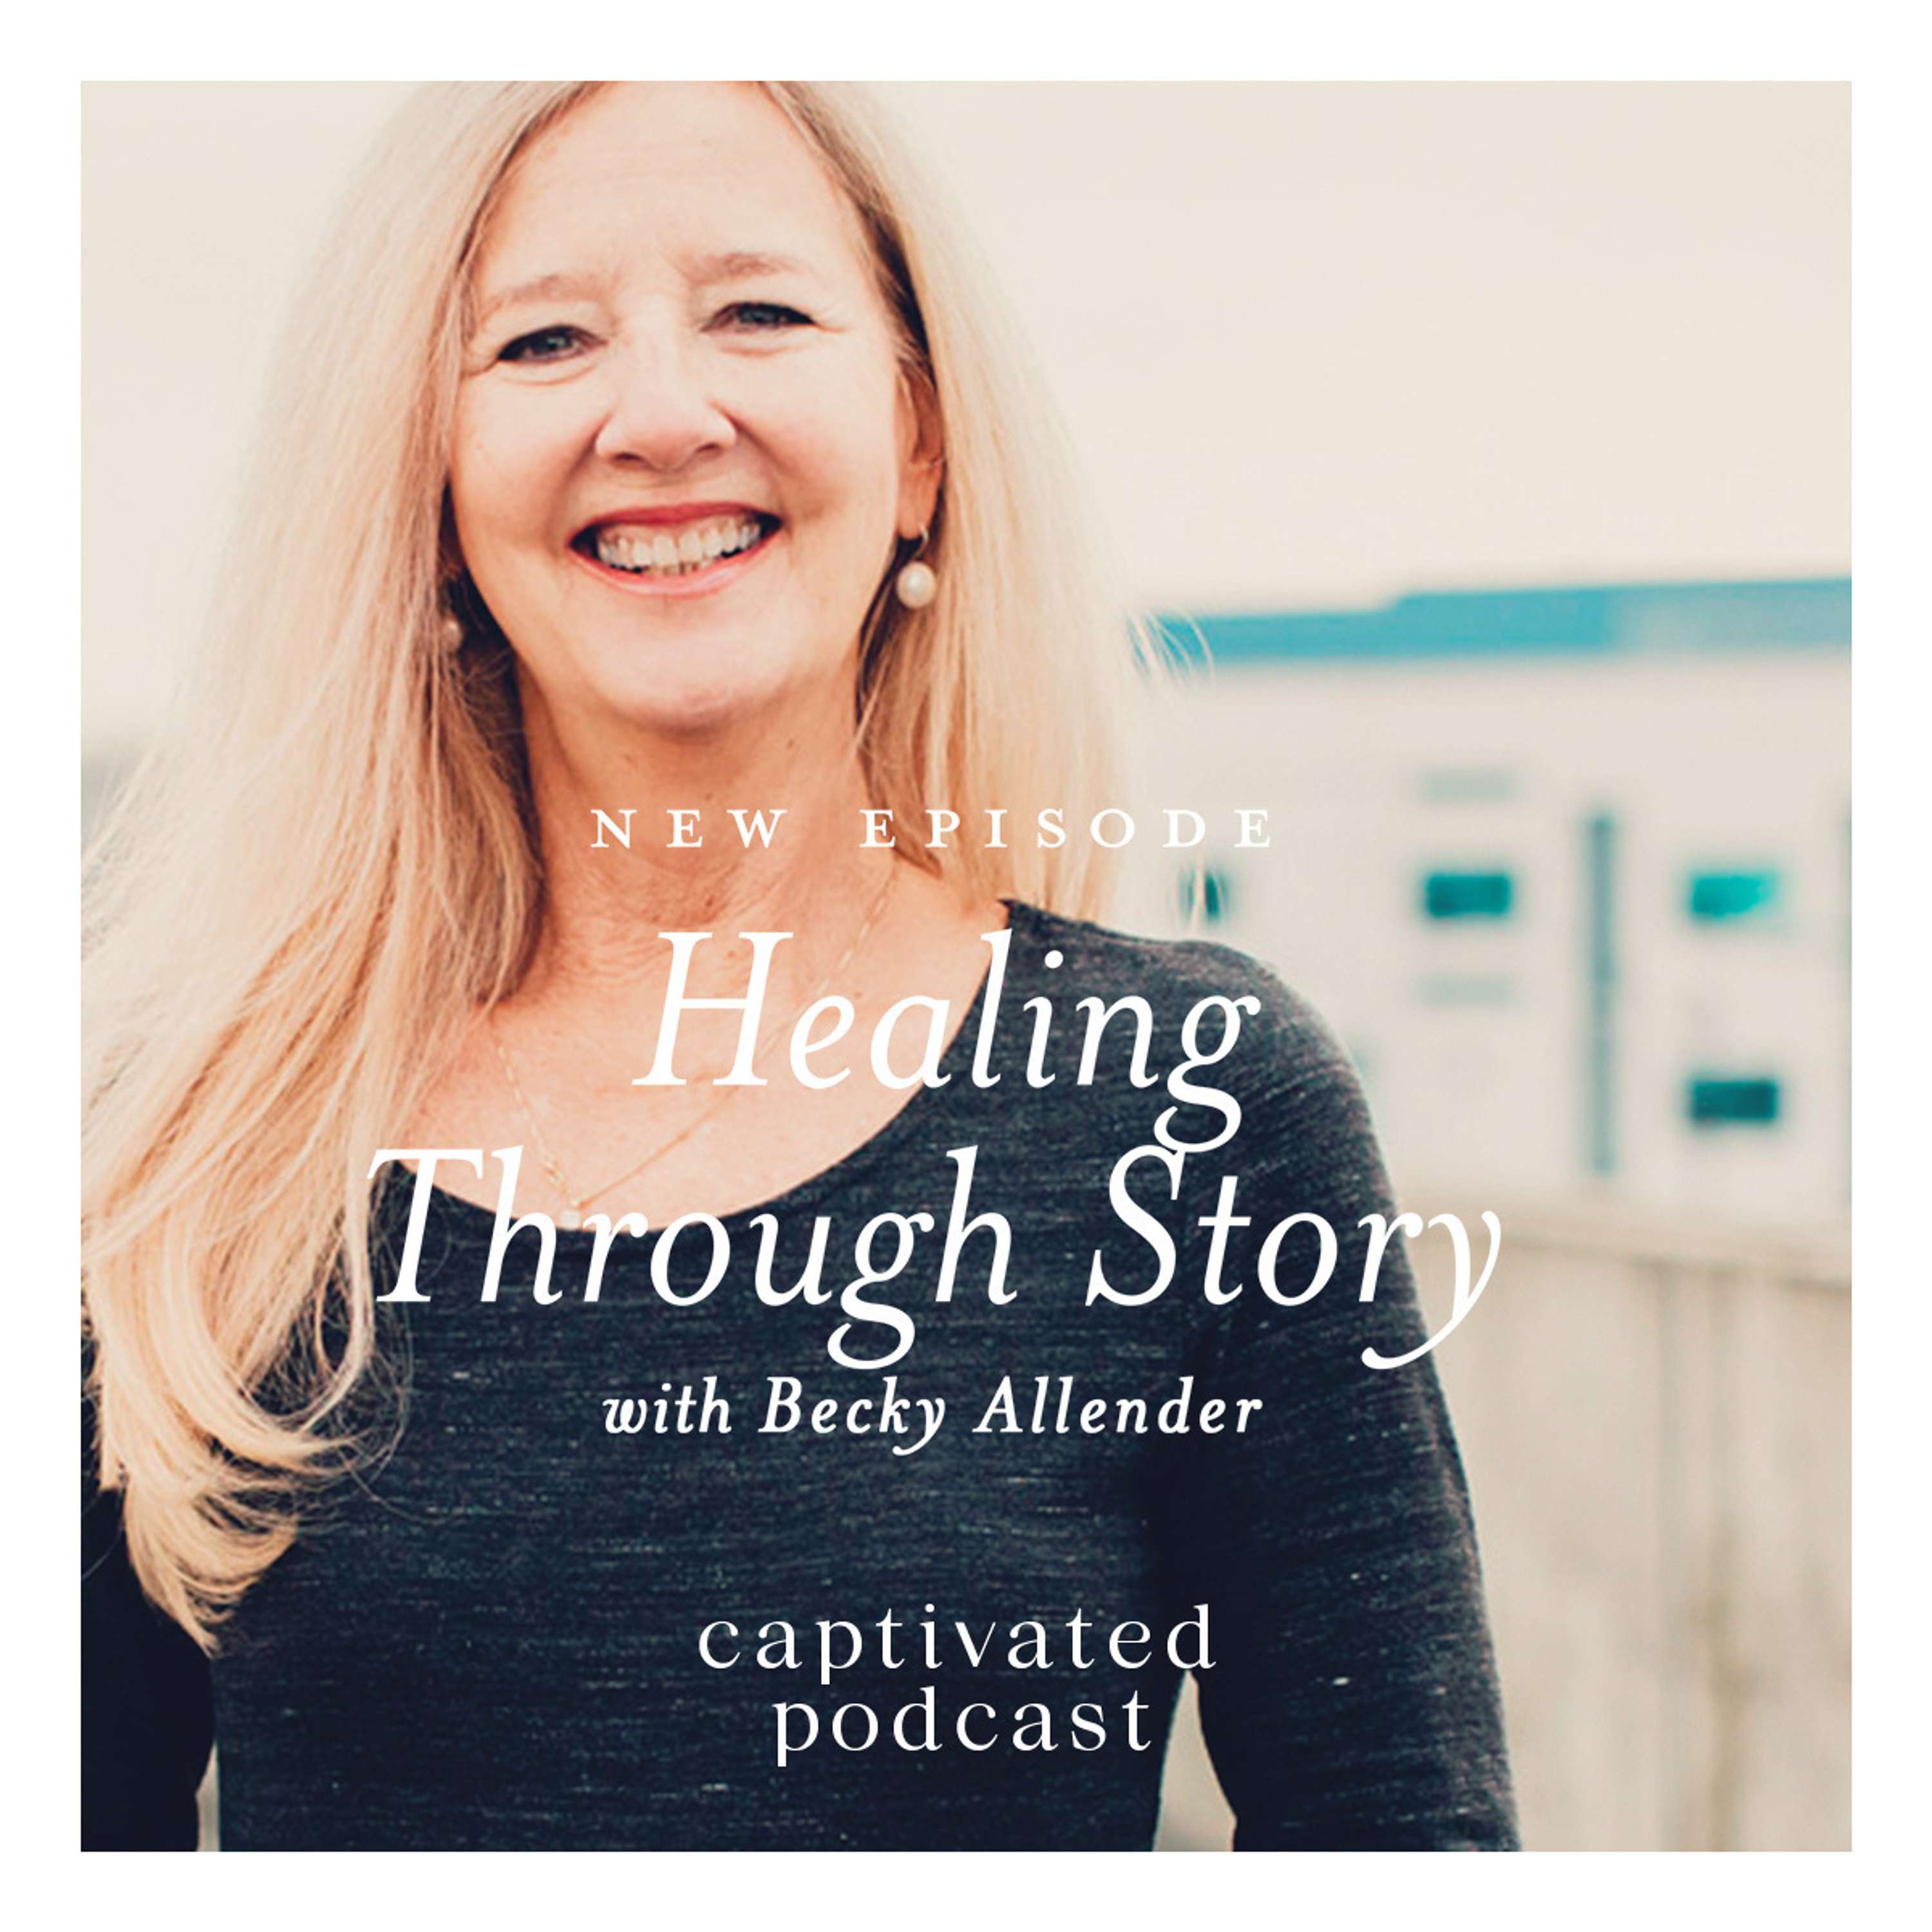 Healing Through Story with Becky Allender